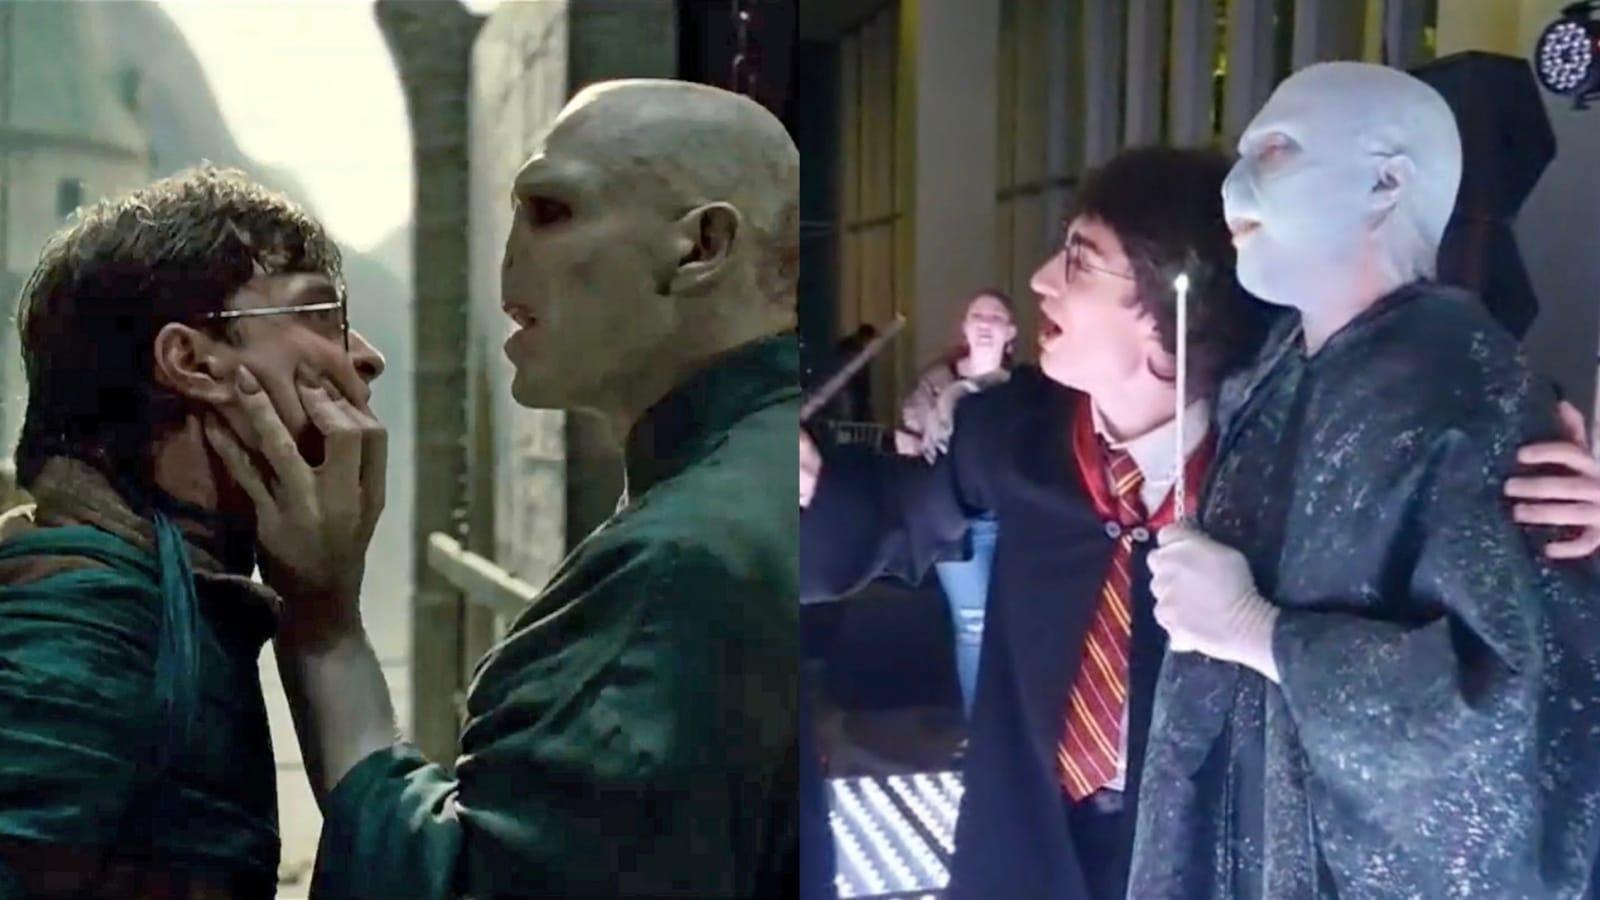 These Harry Potter & Voldemort dancing cosplayers have gone viral